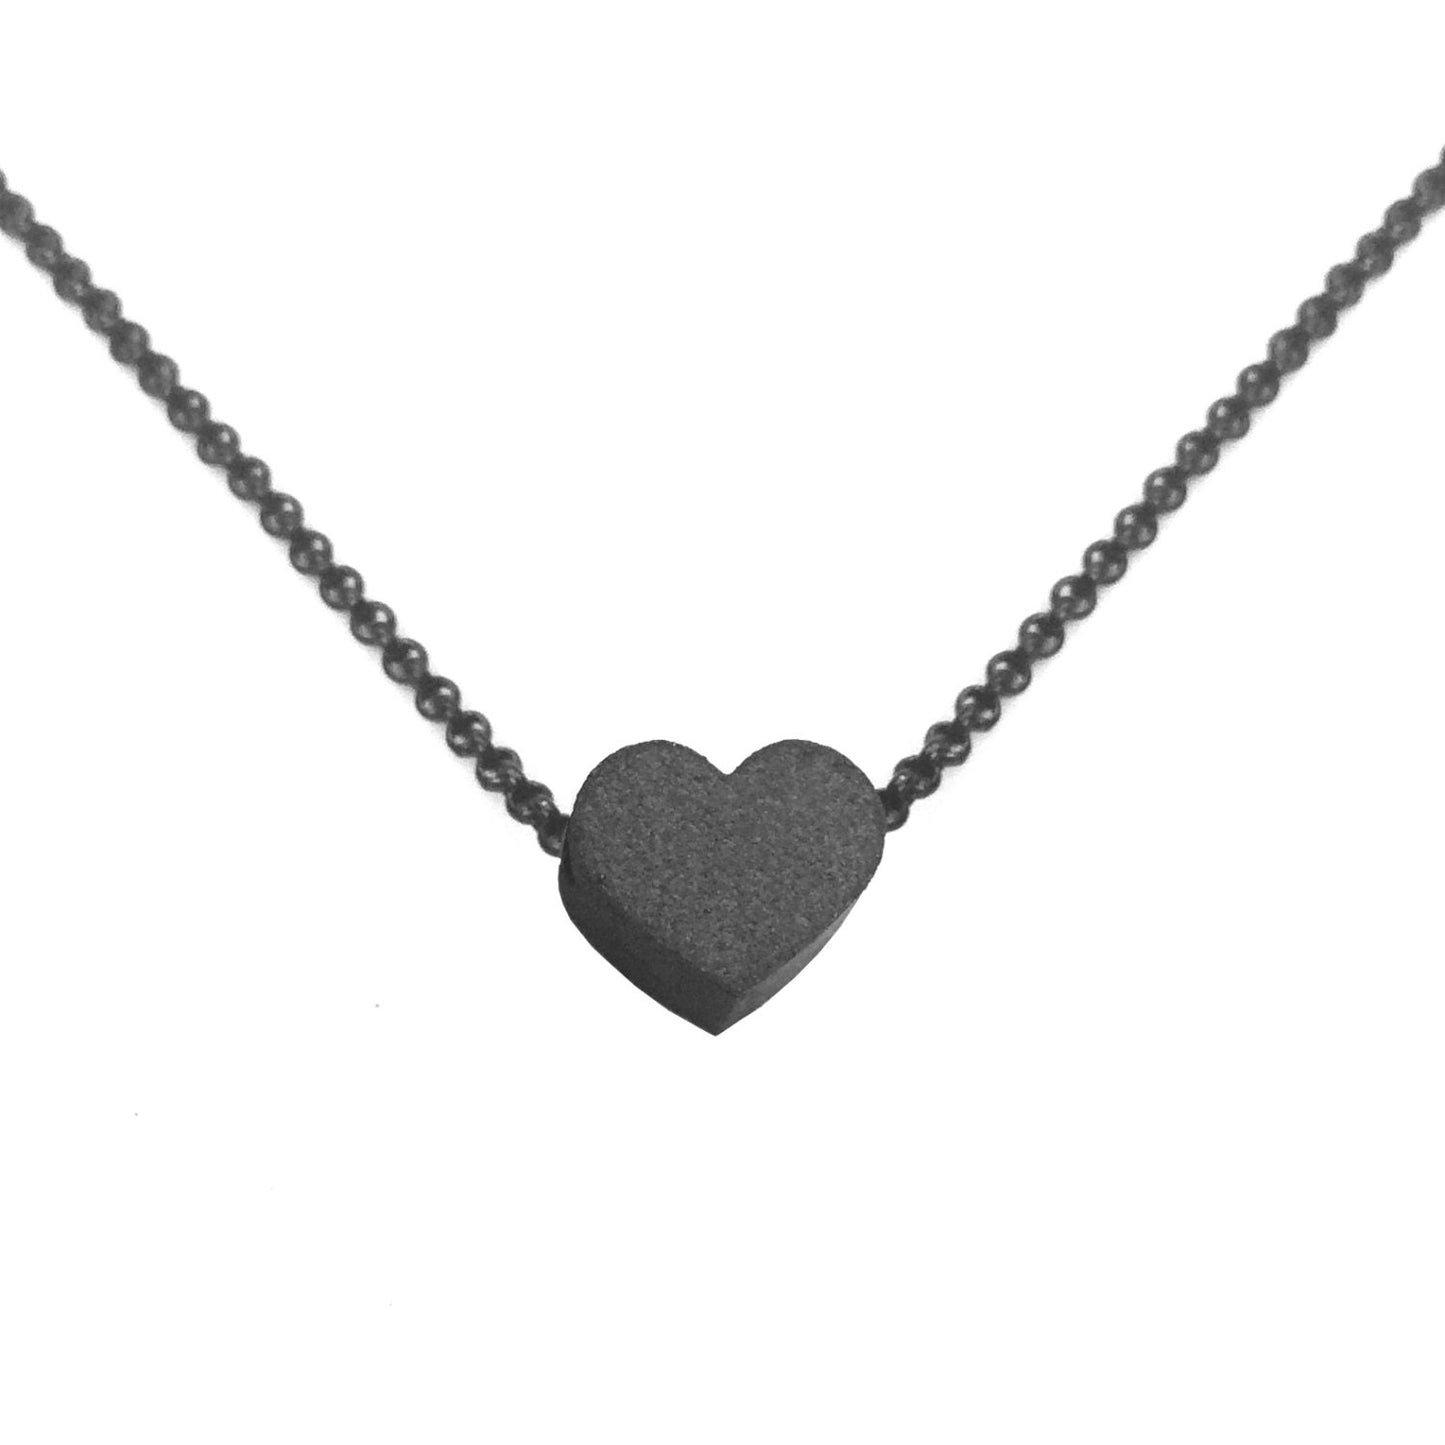 Black Heart Necklace, Love Jewelry, Small Stainless Steel Heart Pendant, Gift for Her